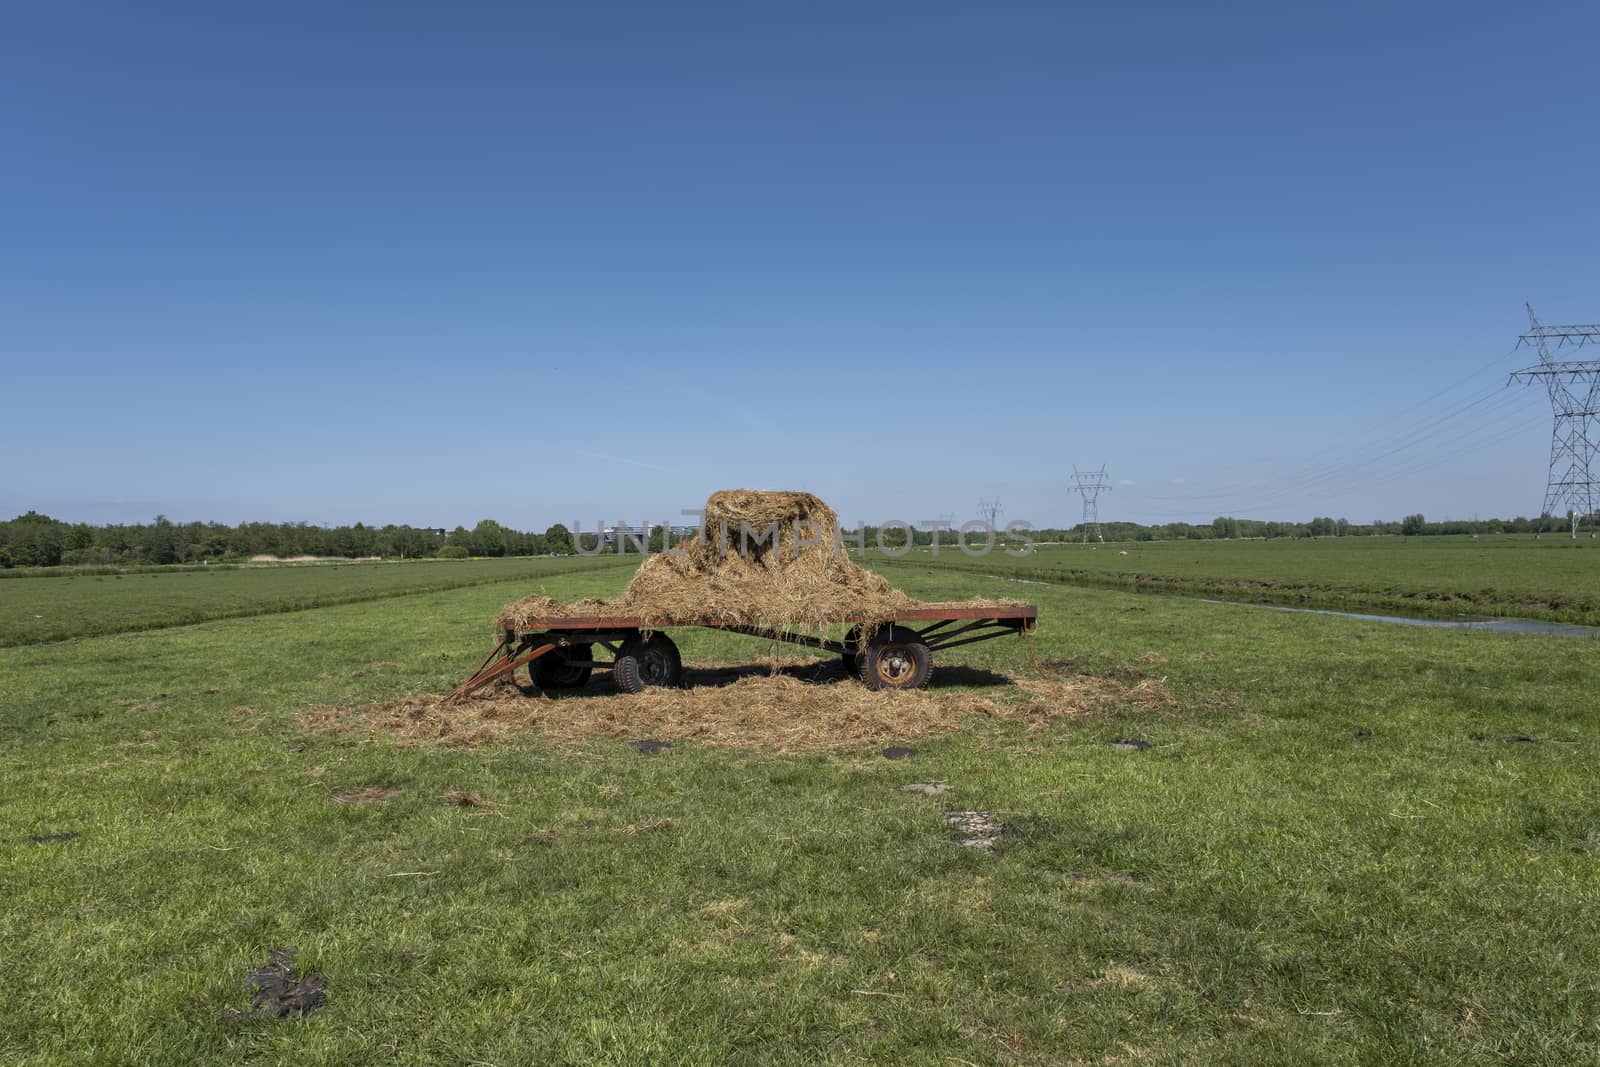 Old Hay Wagon in the Field against a blue sky in the netherlands by Tjeerdkruse